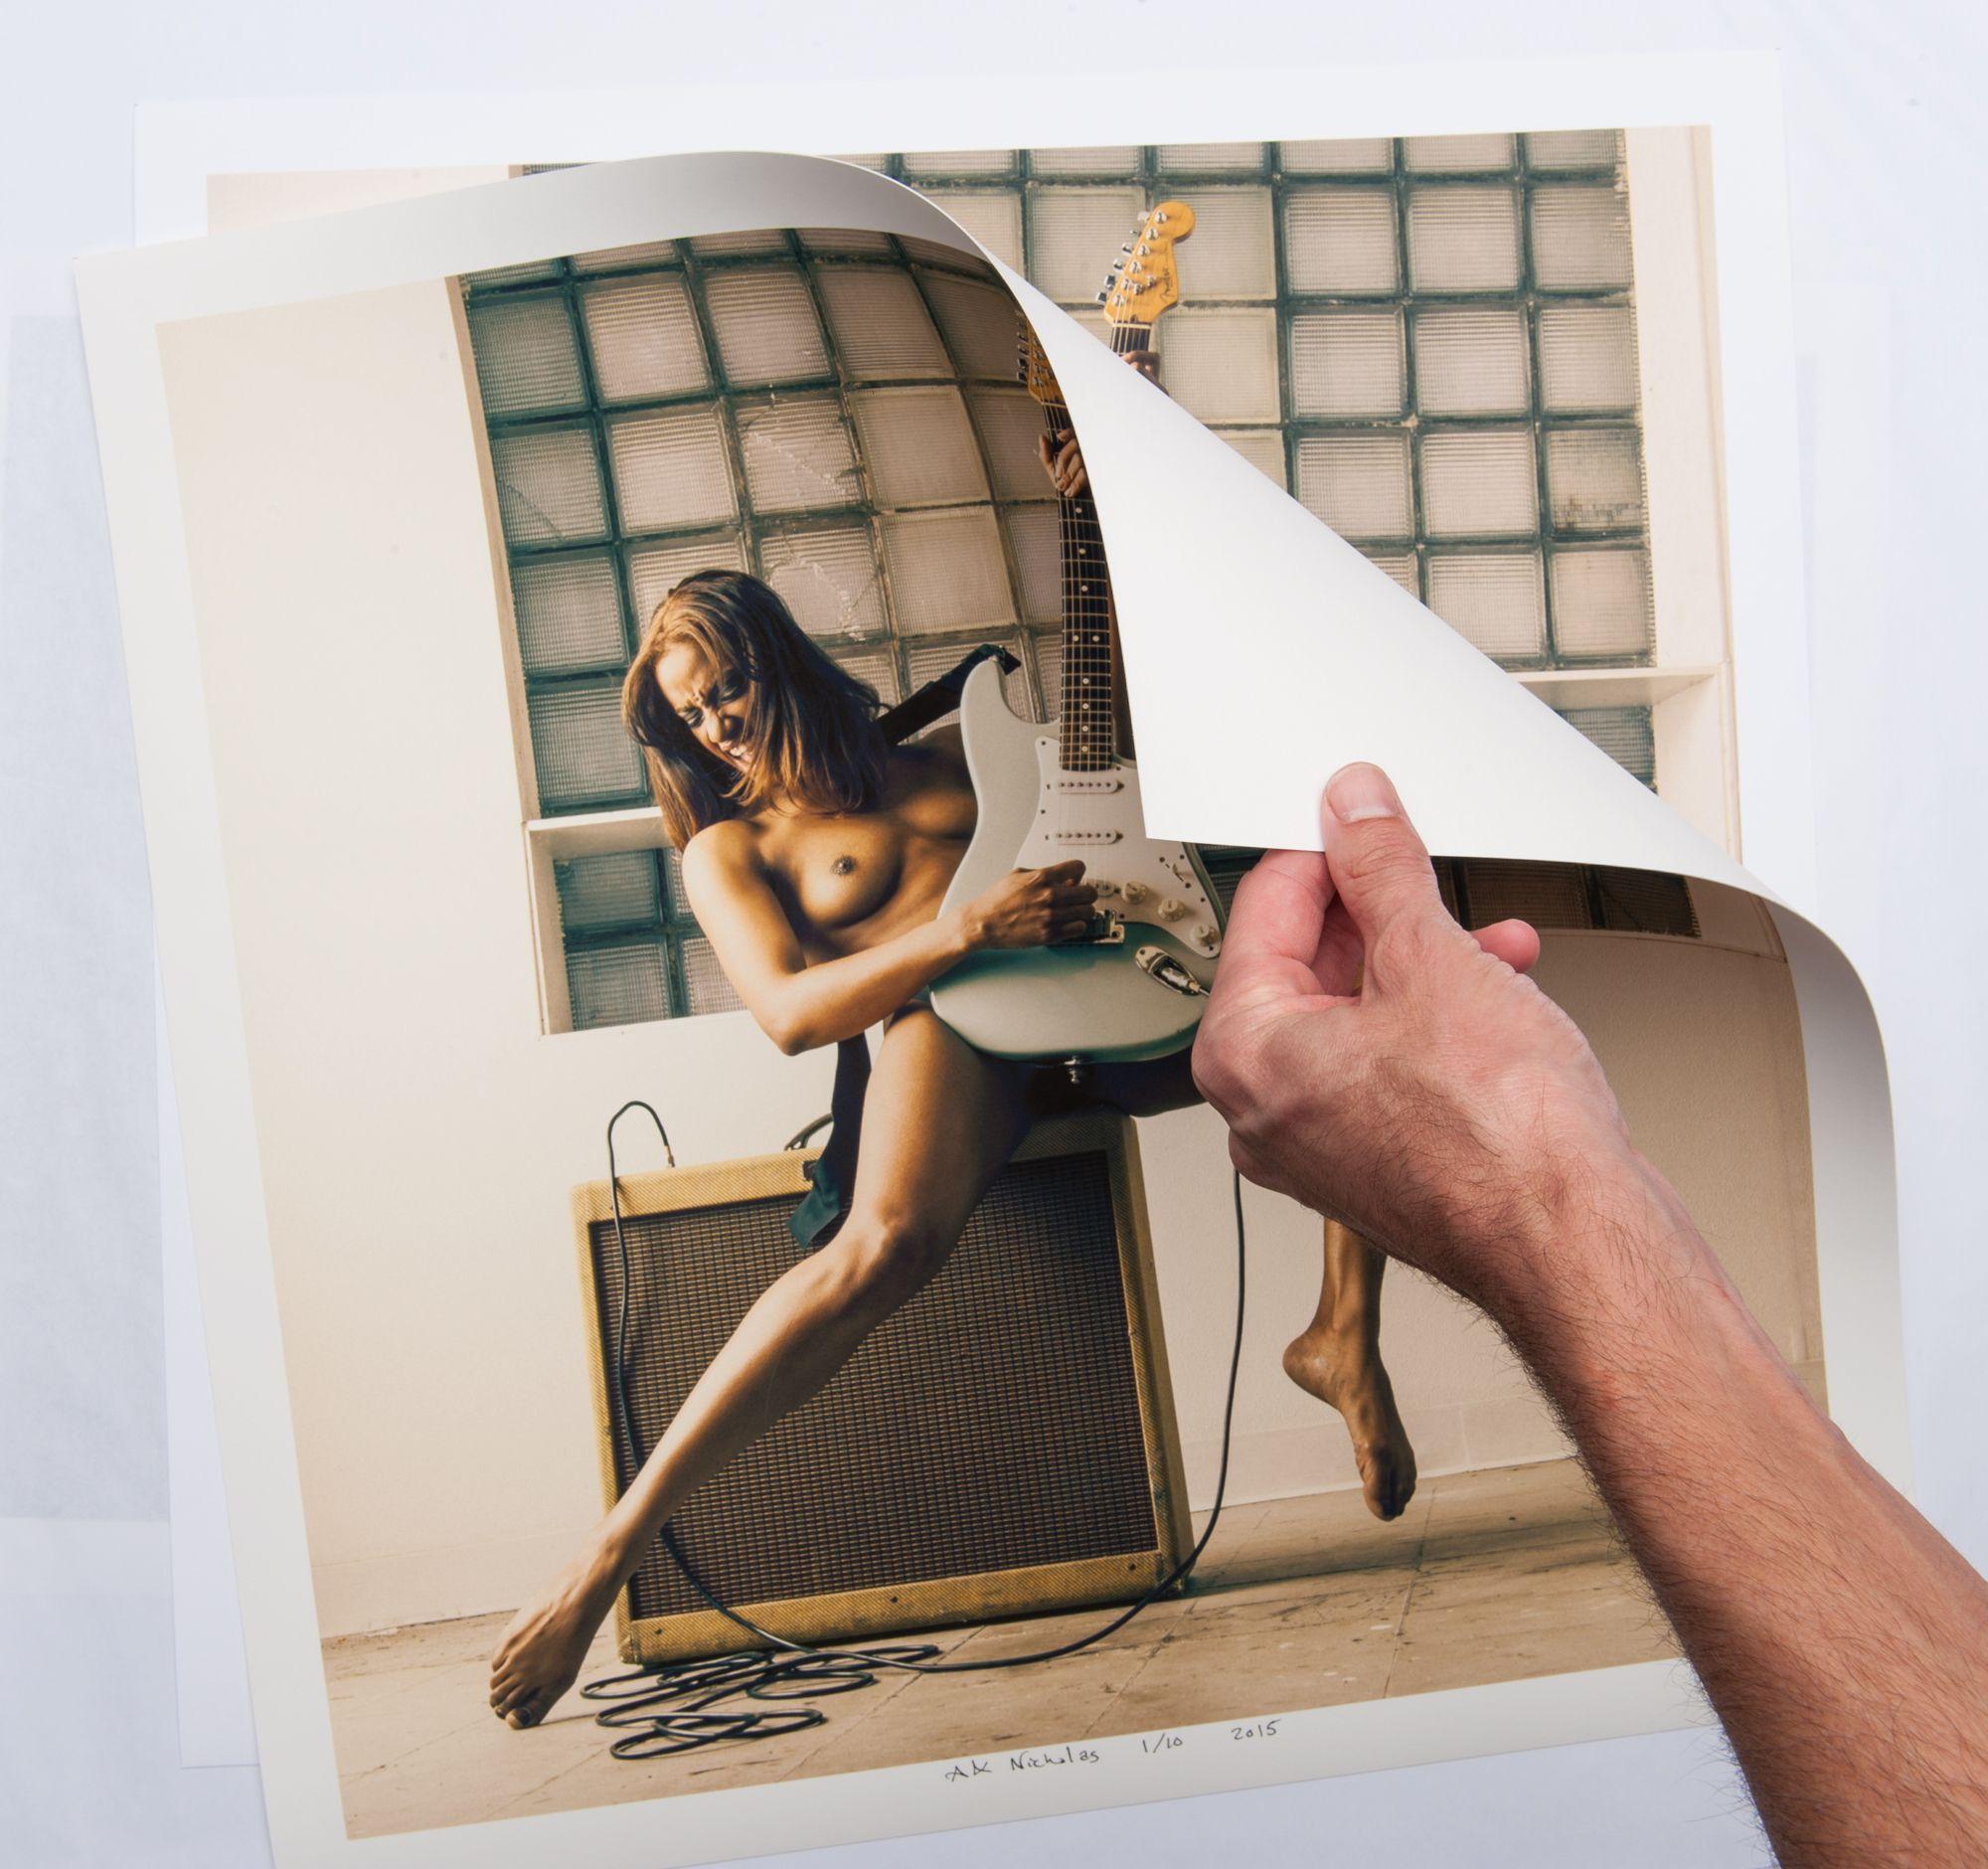 From a limited edition of 10 archival photographs.   Signed and numbered by artist Aaron Knight.   The theme of a woman playing a guitar dates back at least to Johannes Vermeerâ€™s 17th century painting, shortly after the rise of the instrument into